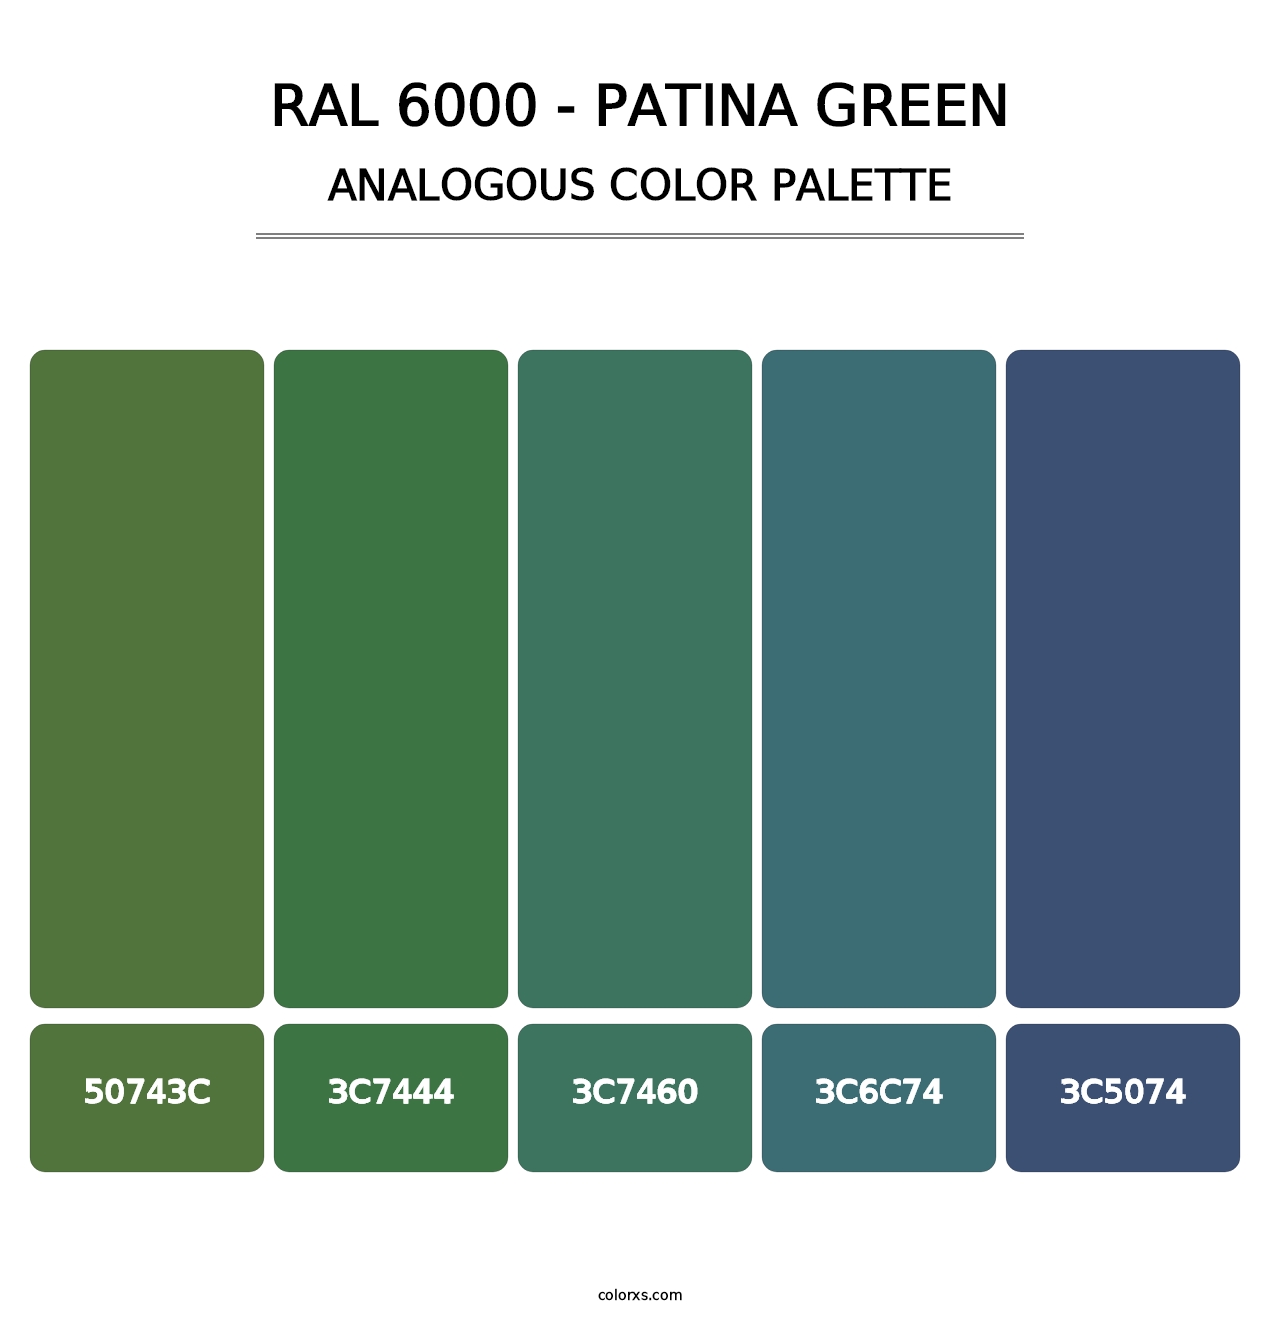 RAL 6000 - Patina Green - Analogous Color Palette